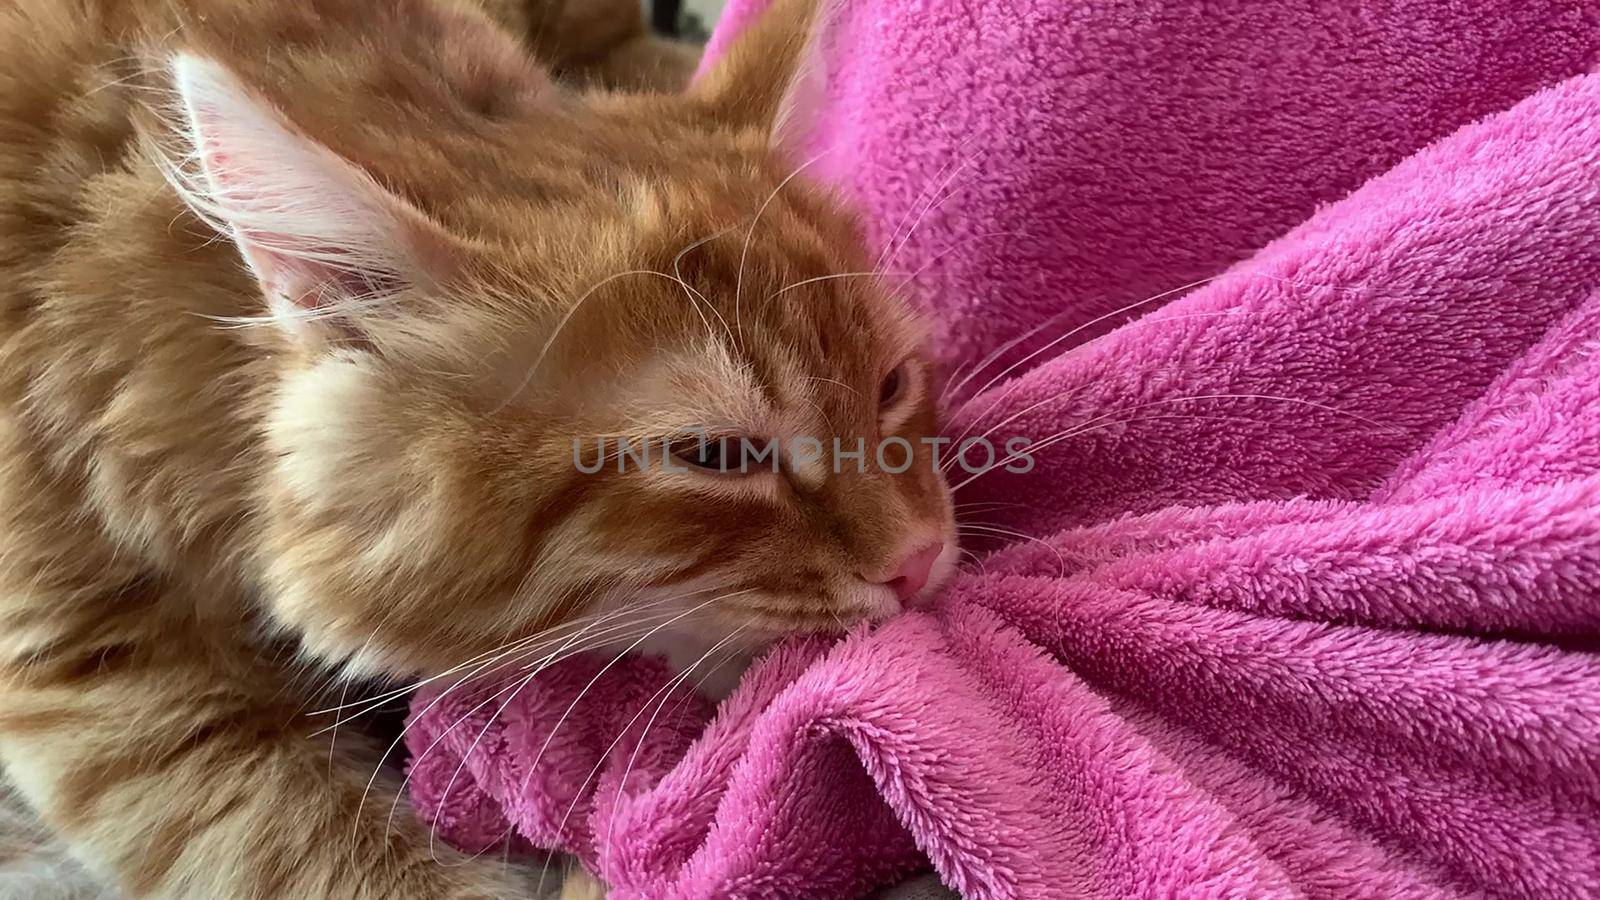 a redhaired kitten pulls a pink blanket over itself by Eldashev